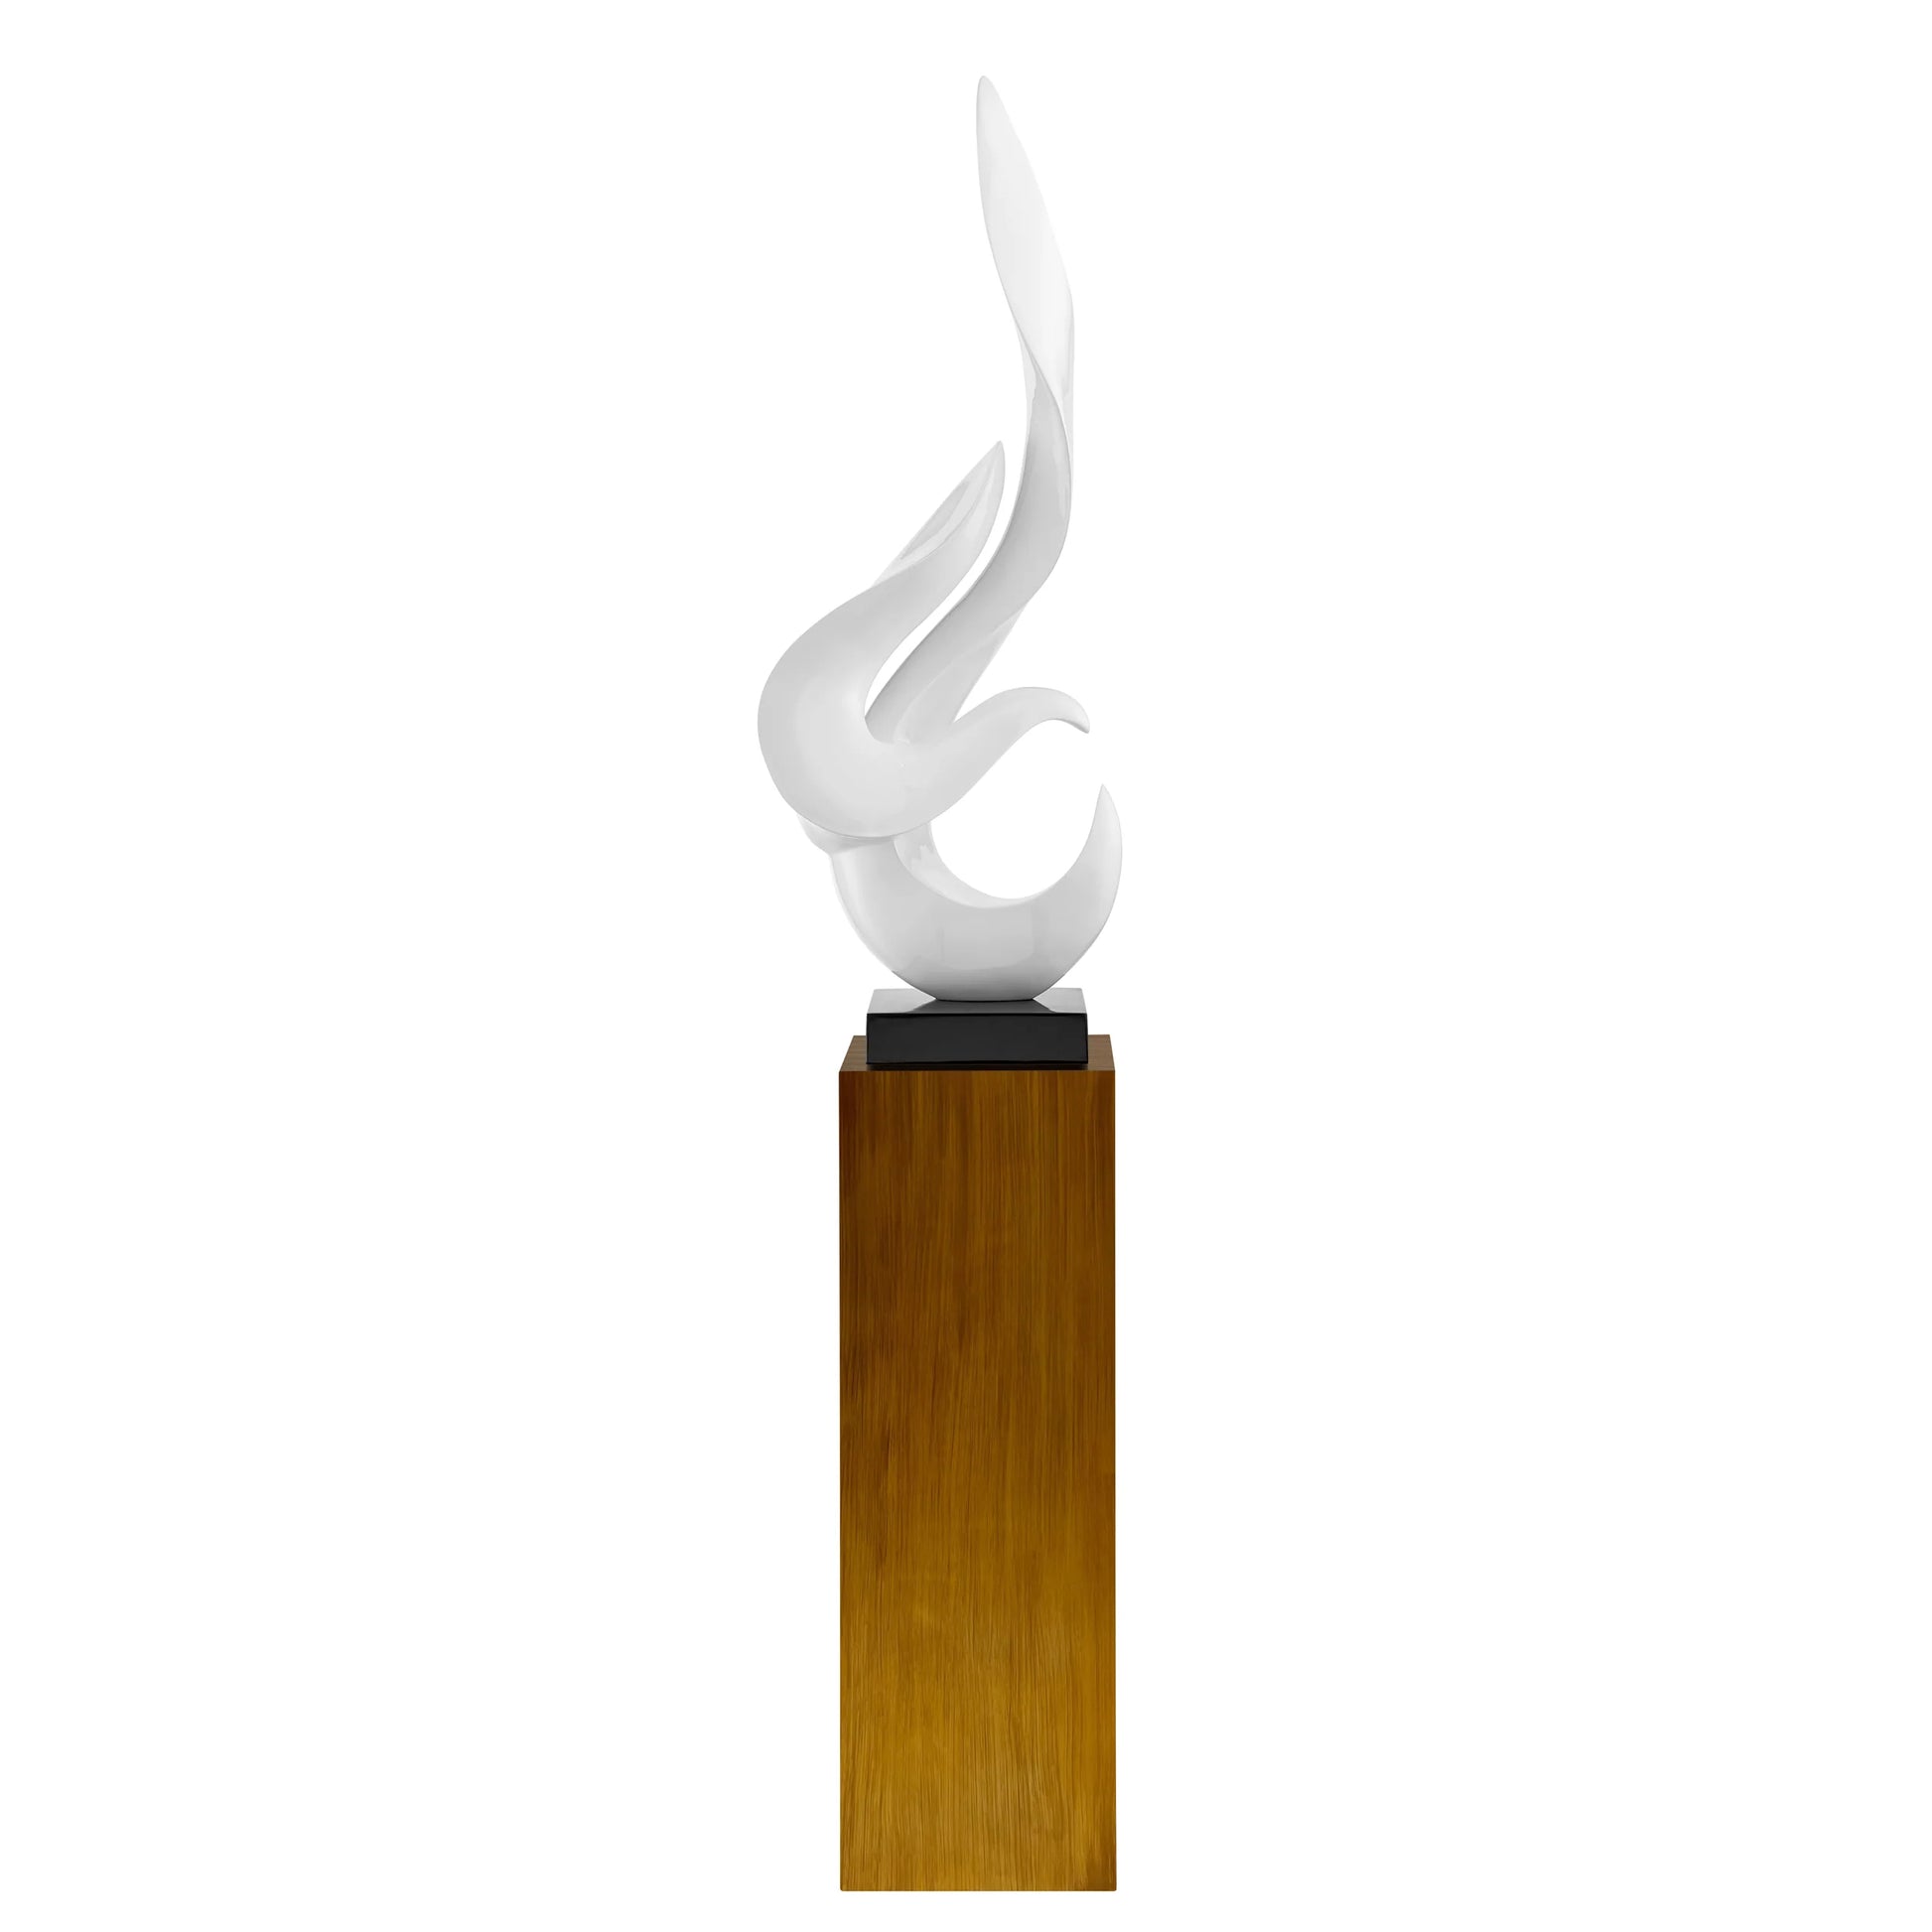 Finesse Decor White Flame Floor Sculpture With Wood Stand 1